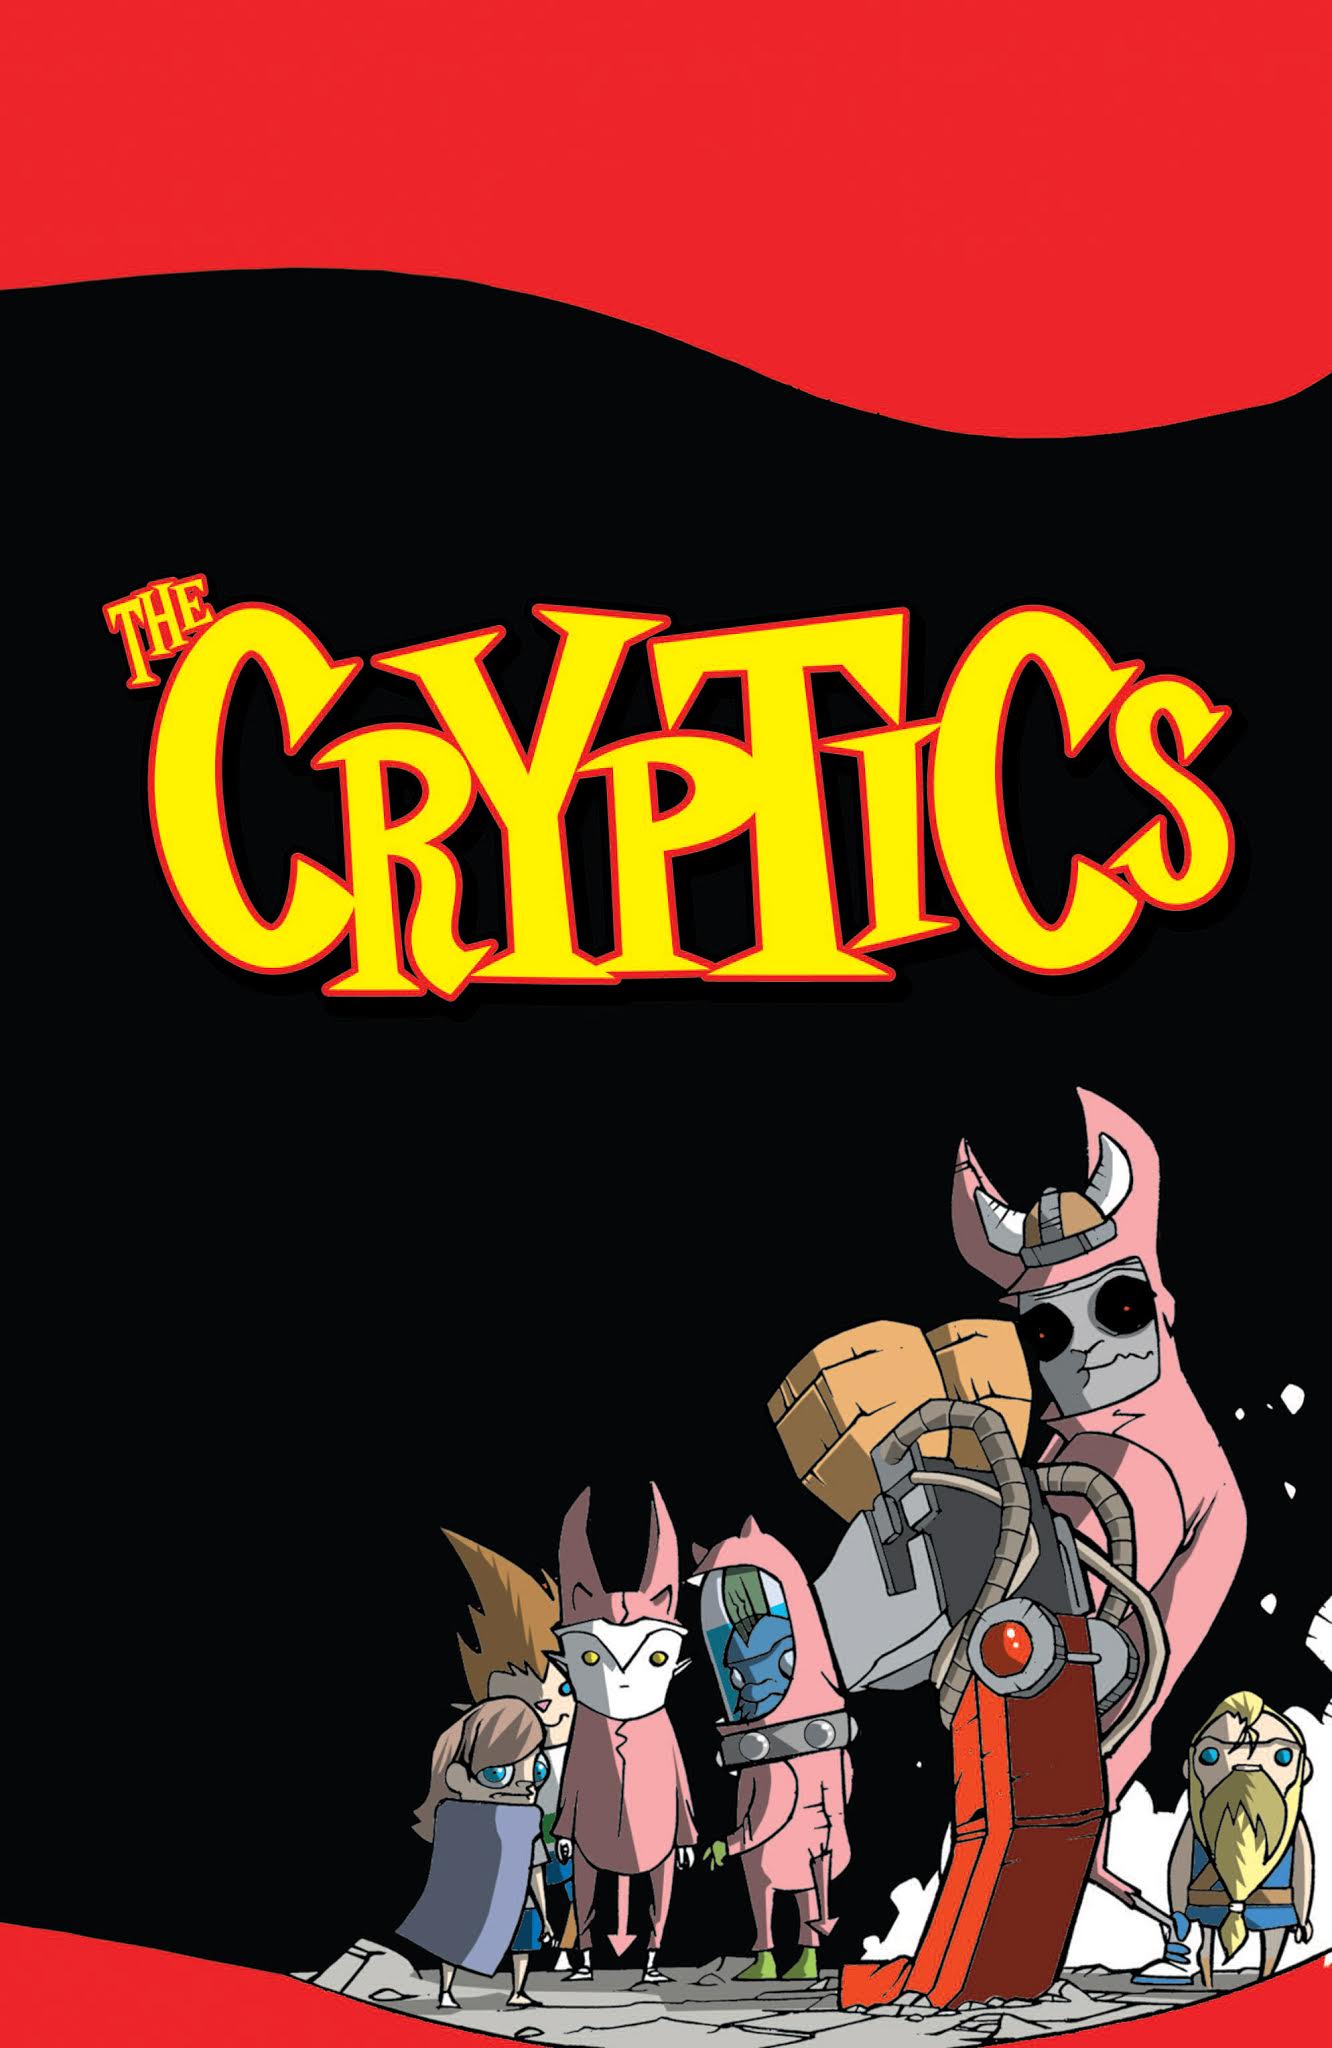 Read online The Cryptics comic -  Issue # TPB - 4